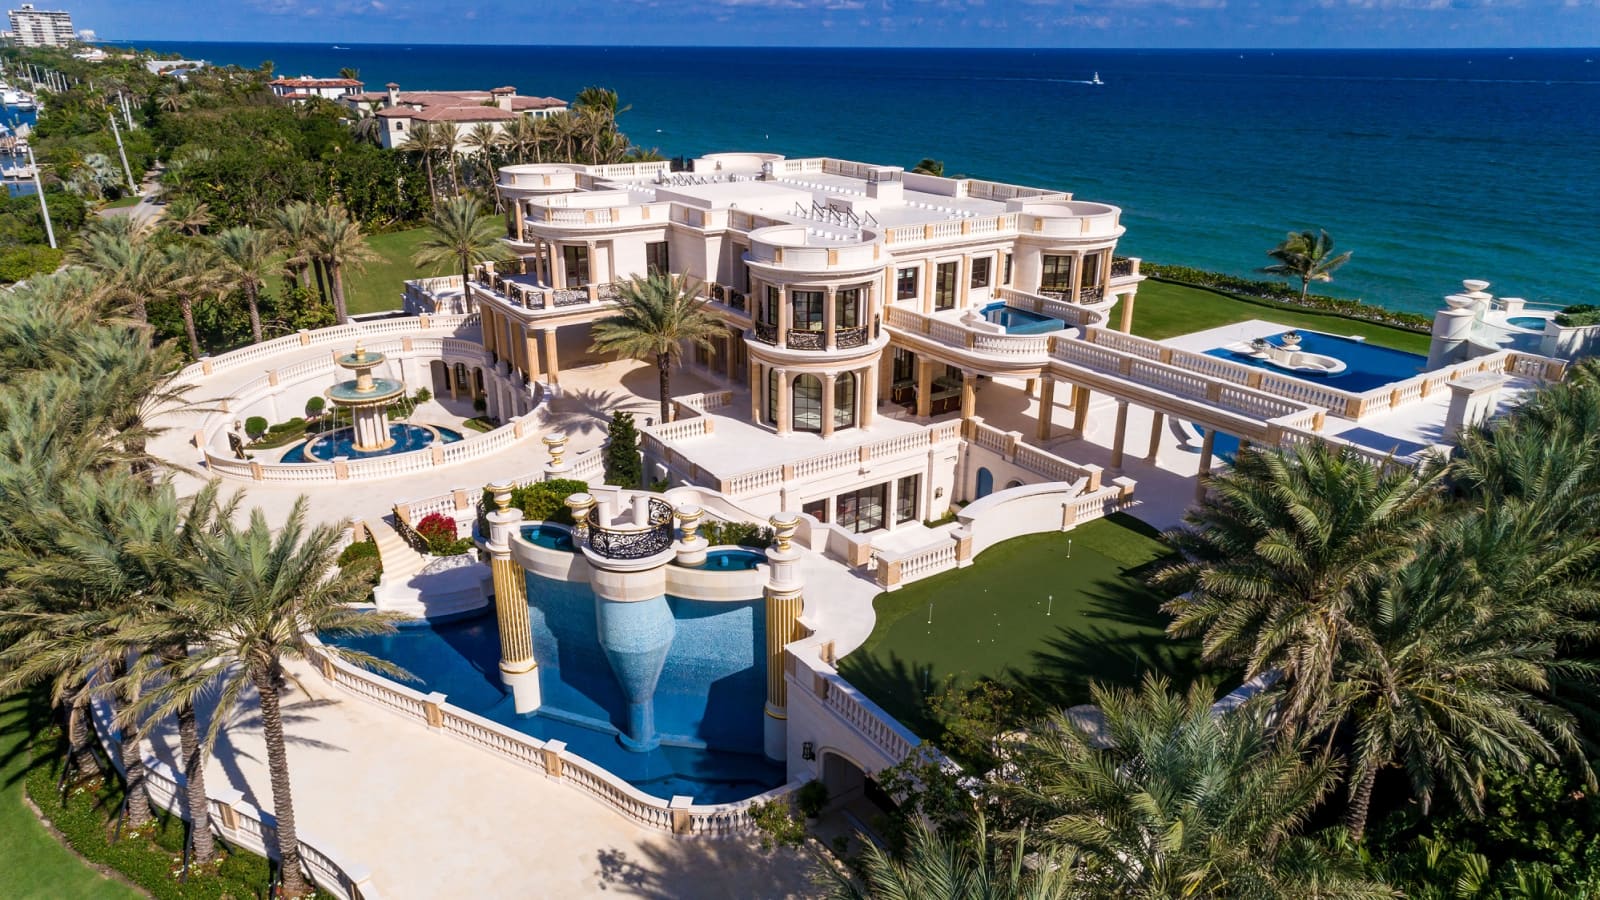 This $159 million Florida mansion is up for auction—take a look inside